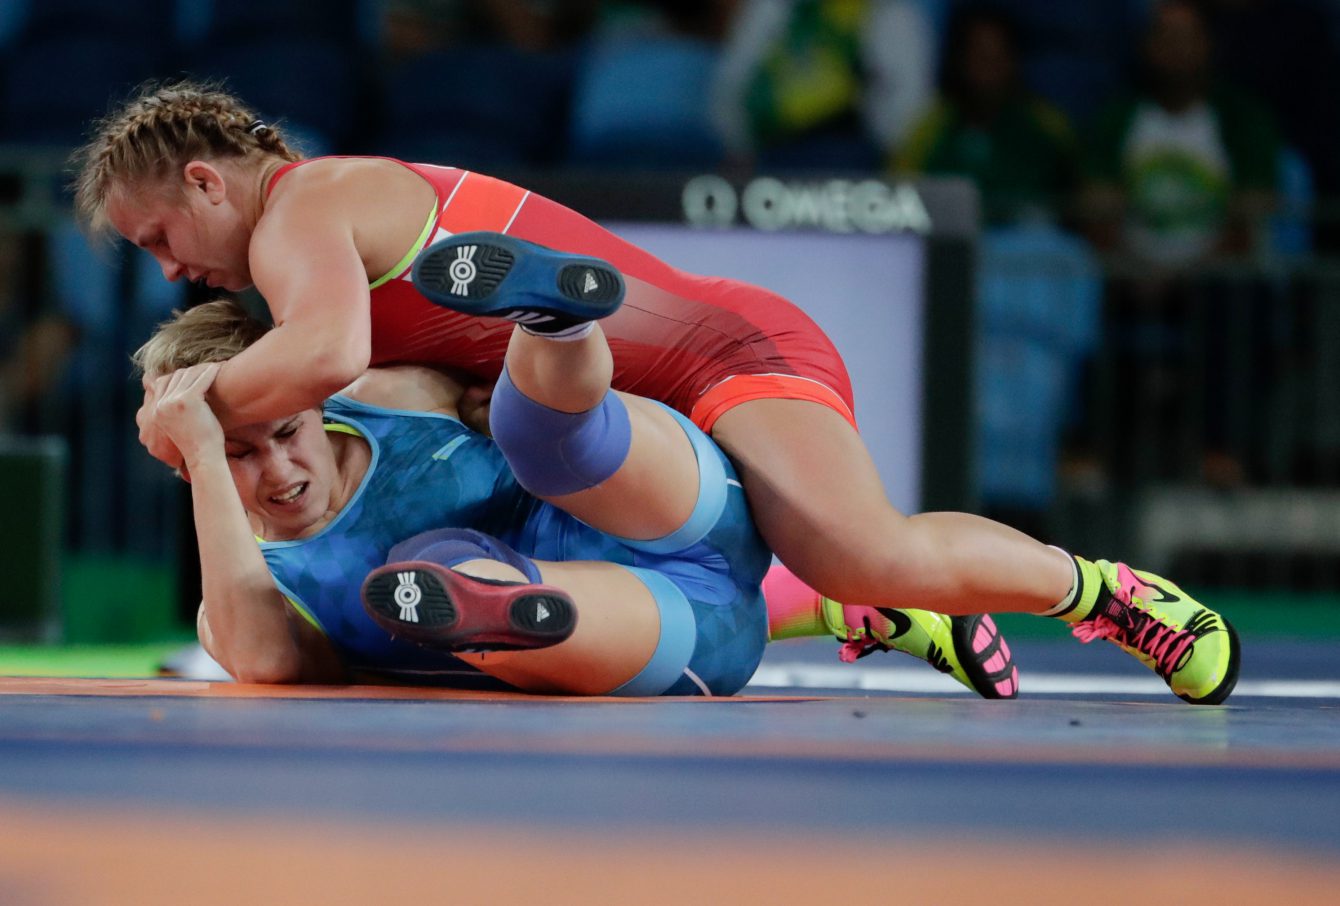 Female players competing in a wrestling match